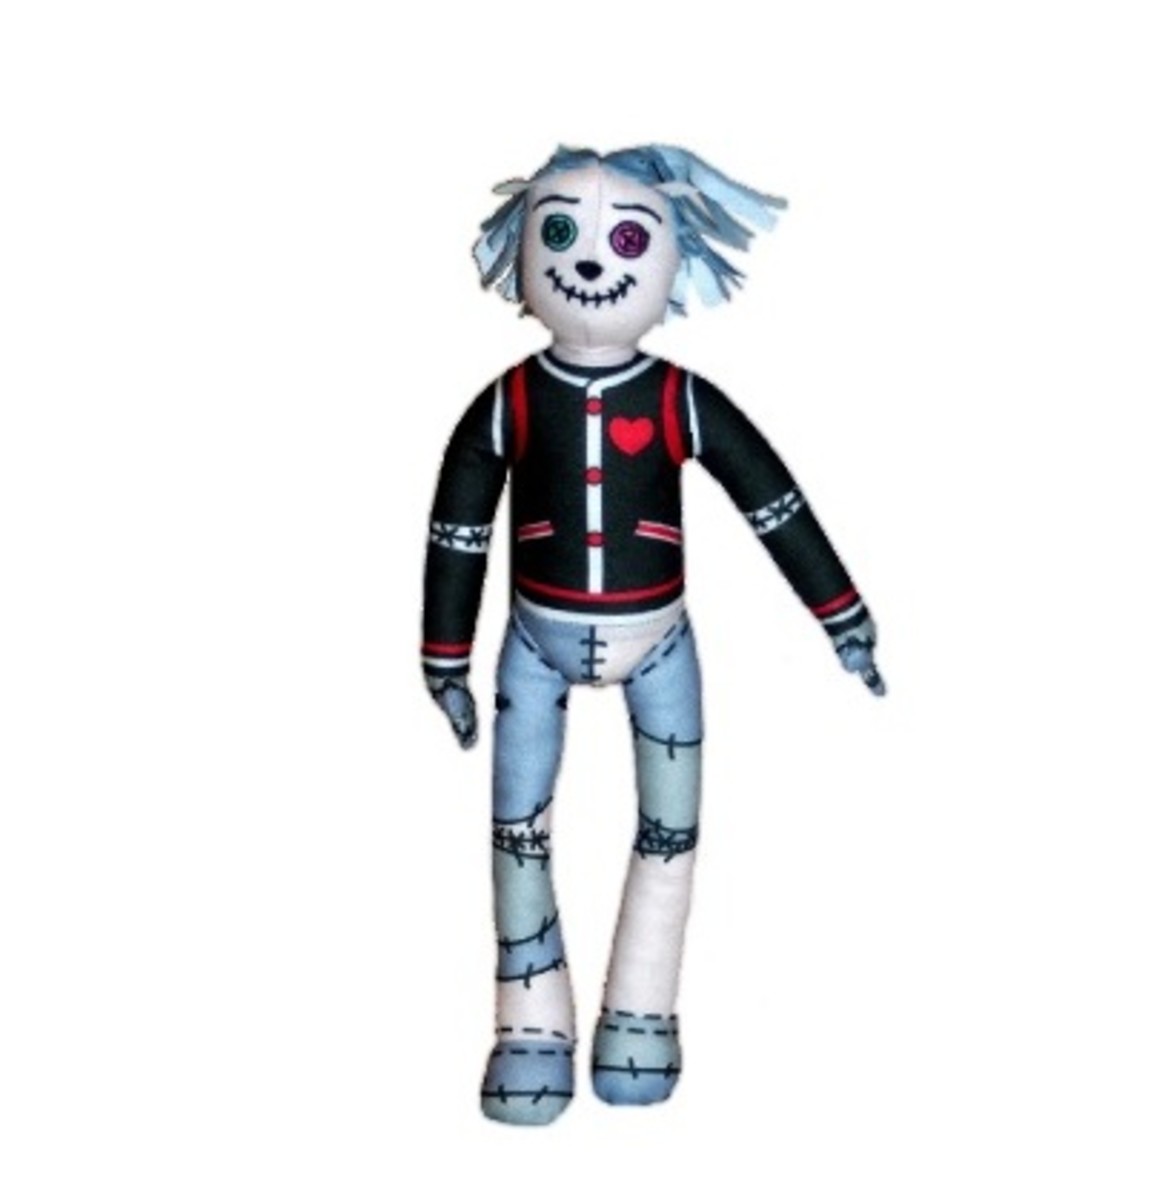 The Hoodude Voodoo Doll From Monster High | HubPages